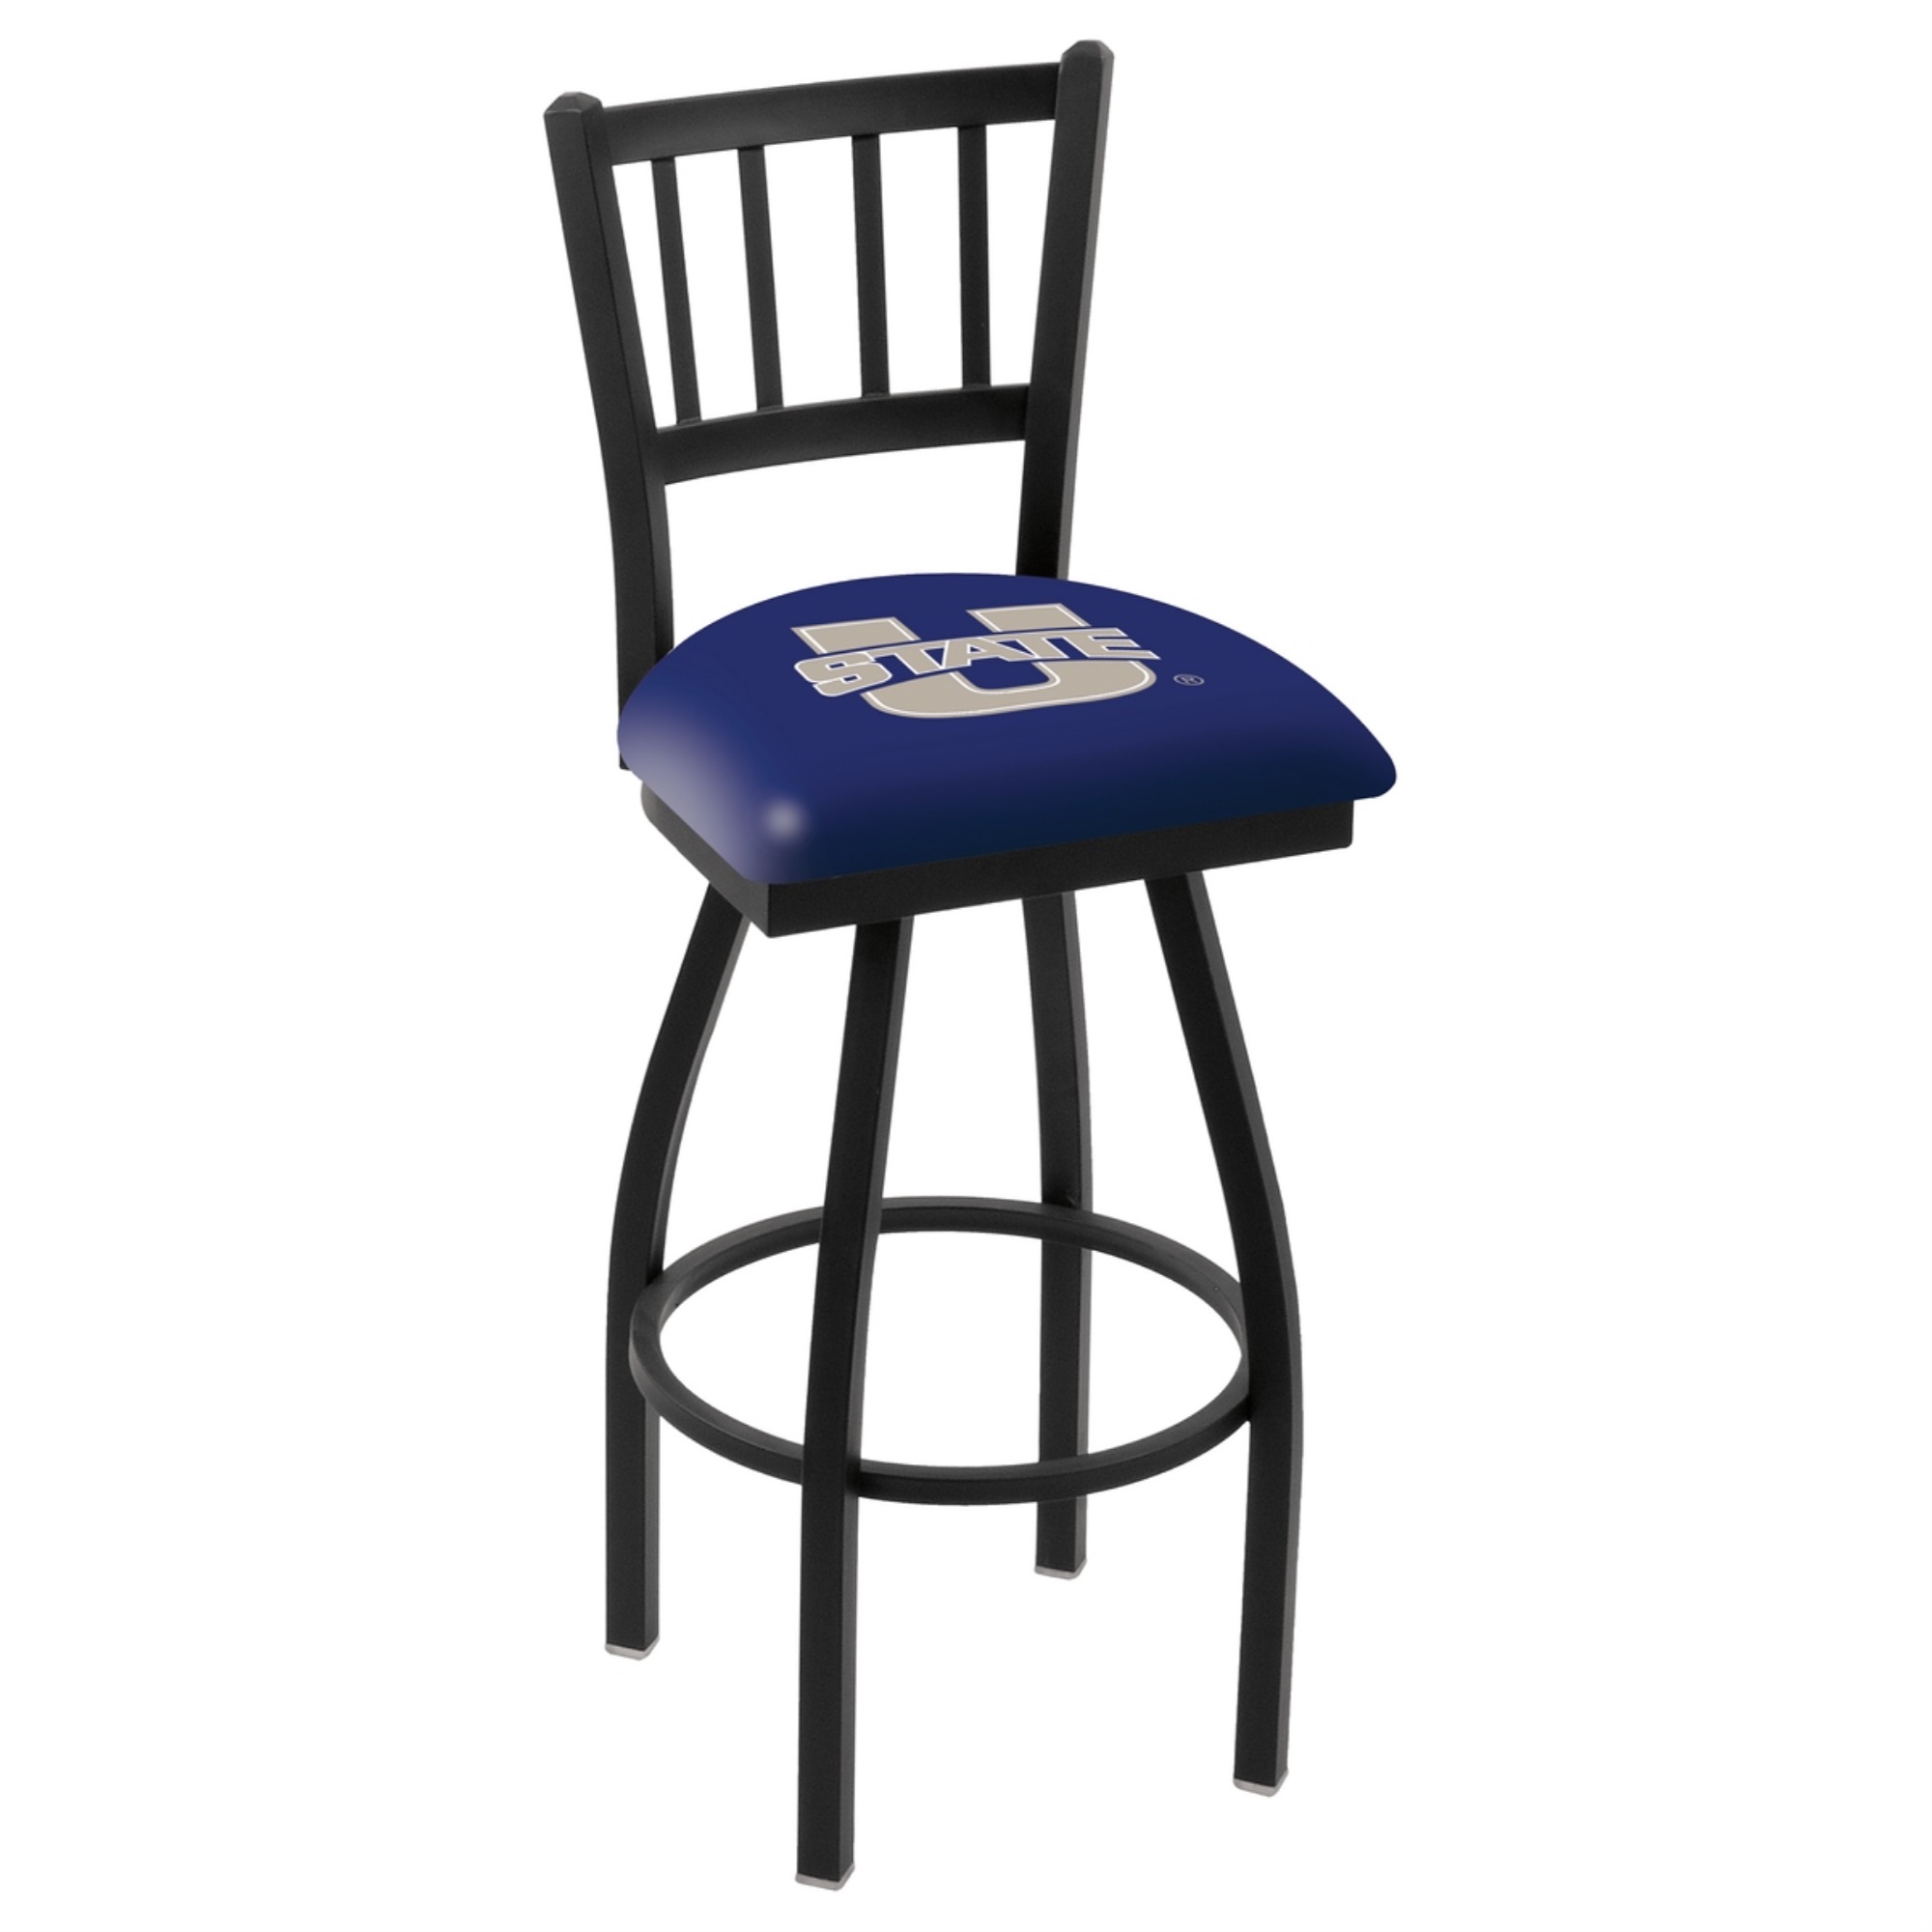 L018 - 36" Black Wrinkle Utah State Swivel Bar Stool with Jailhouse Style Back by the Holland Bar Stool Co. - image 1 of 2